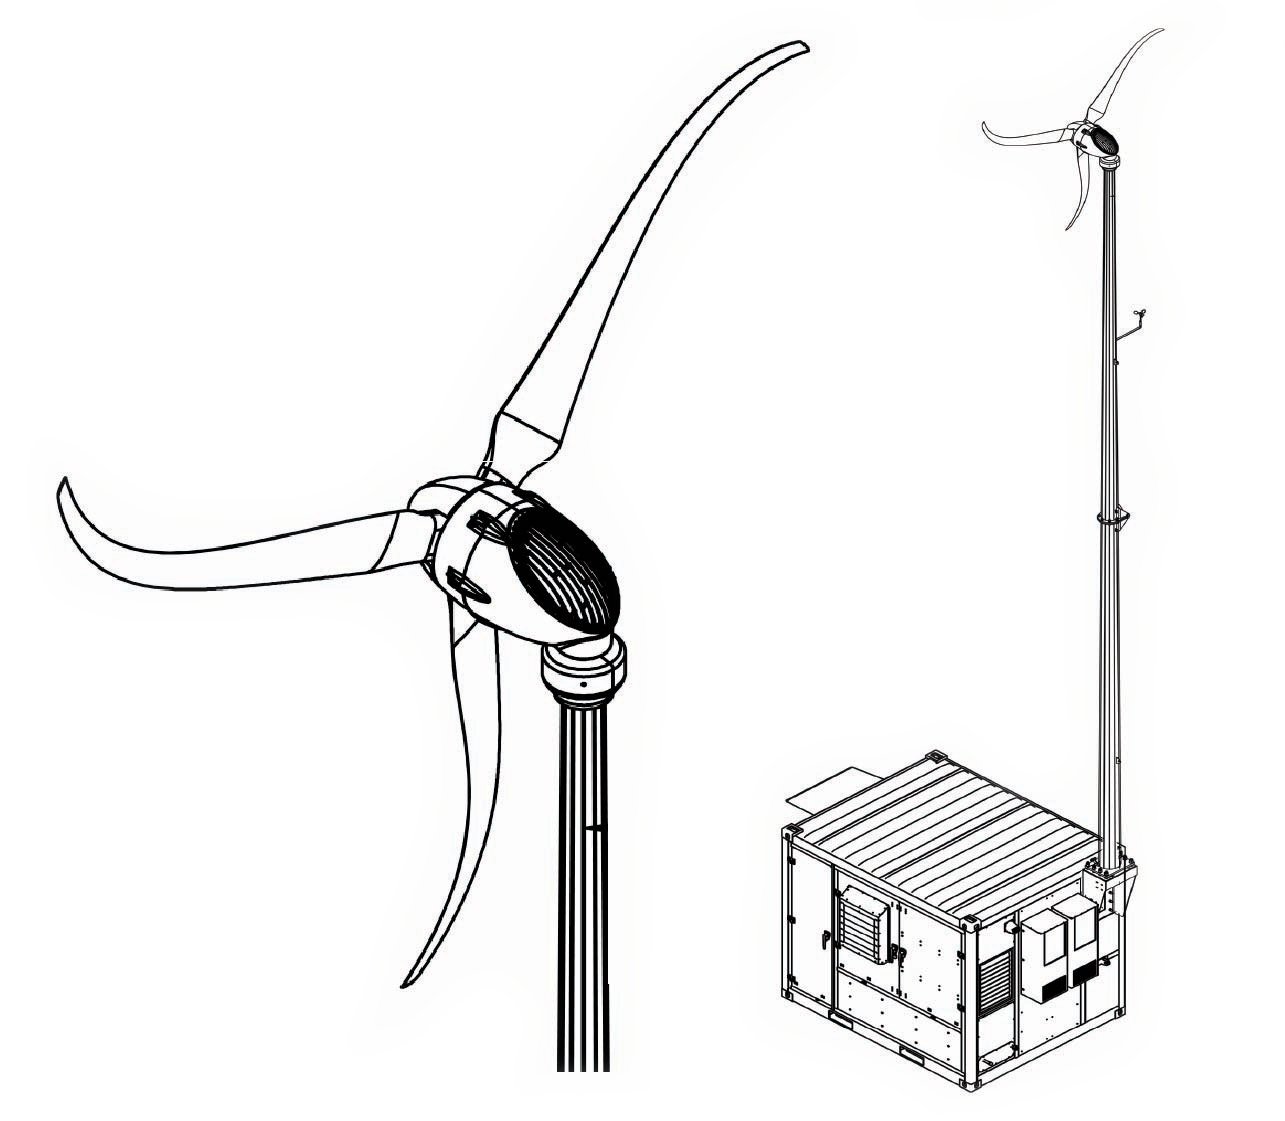 Content_HCI-Energy-Hybrid-Power-Shelter-Wind-Turbine-Option-Products-Page